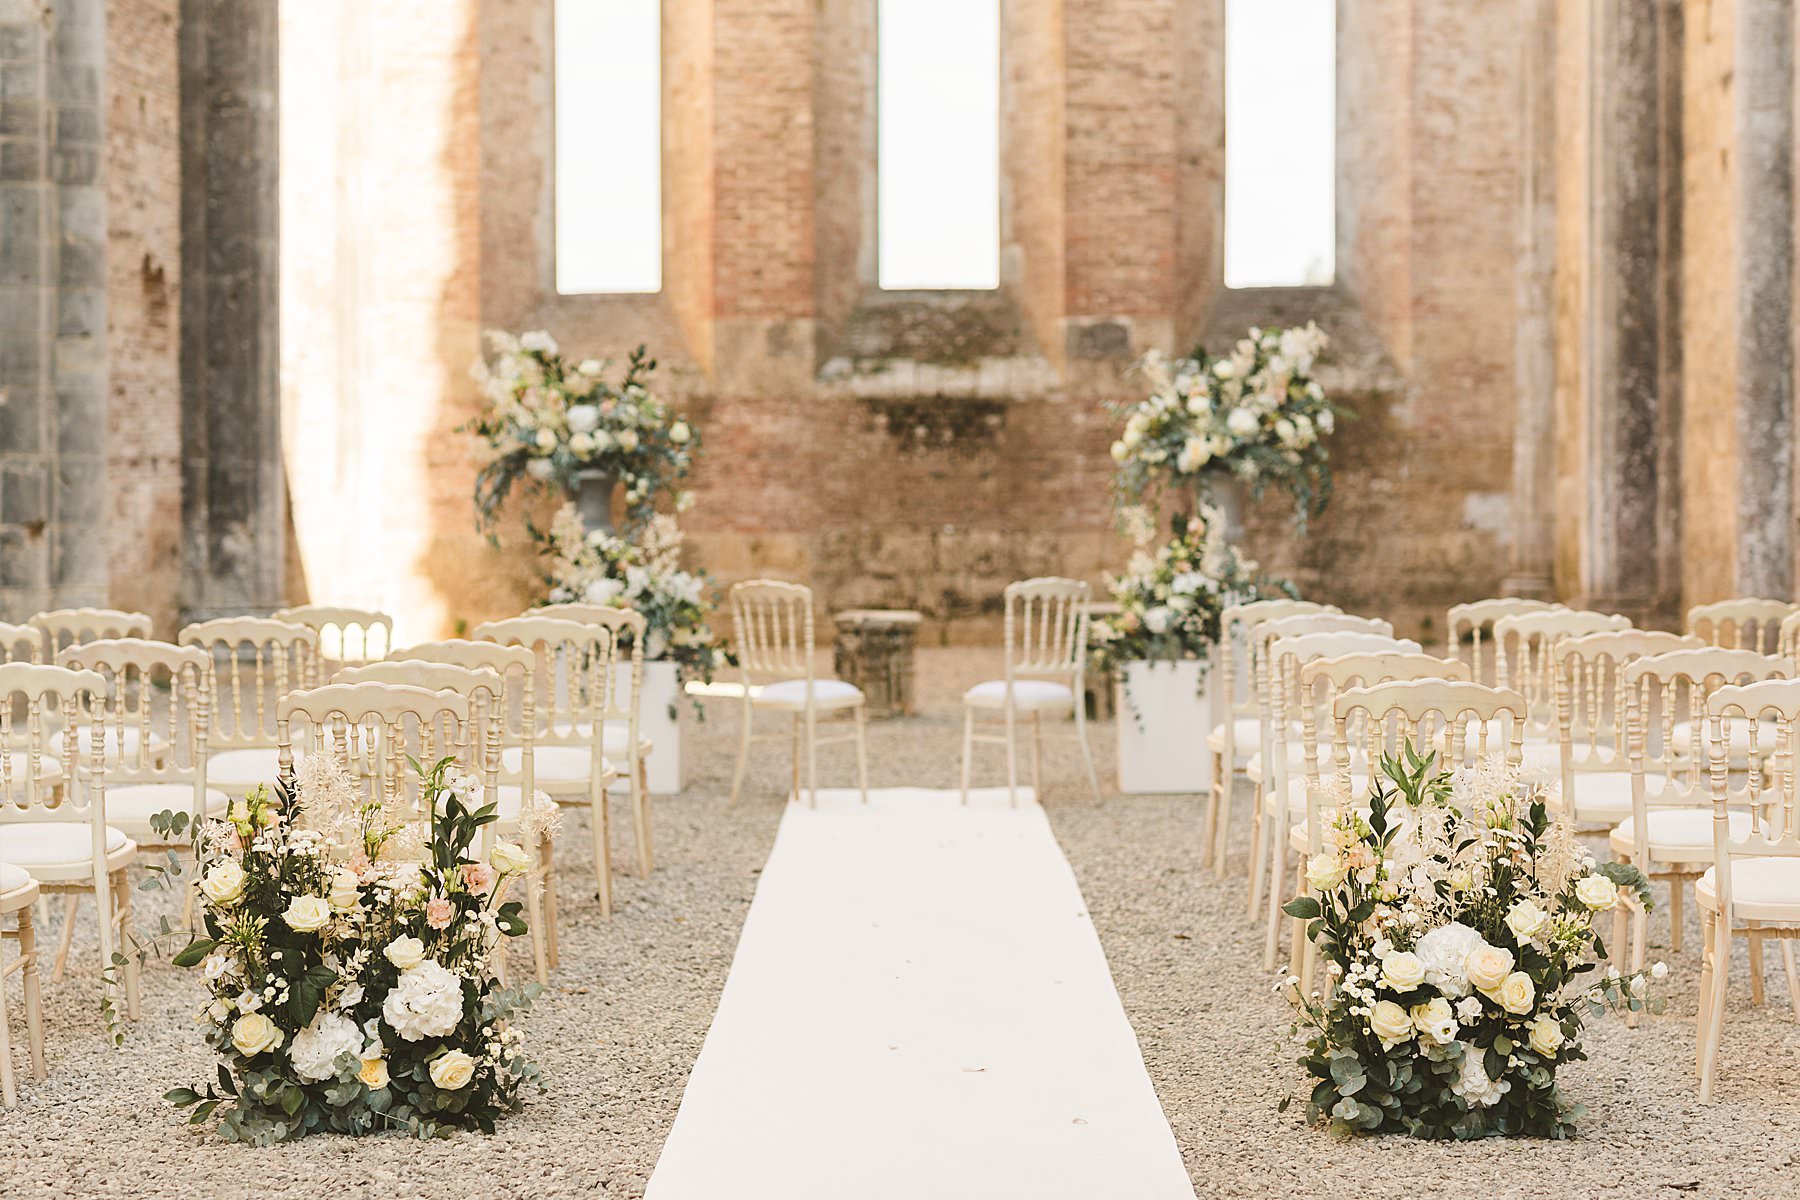 Unforgettable and elegant intimate destination wedding at Roofless Abbey of San Galgano near Siena